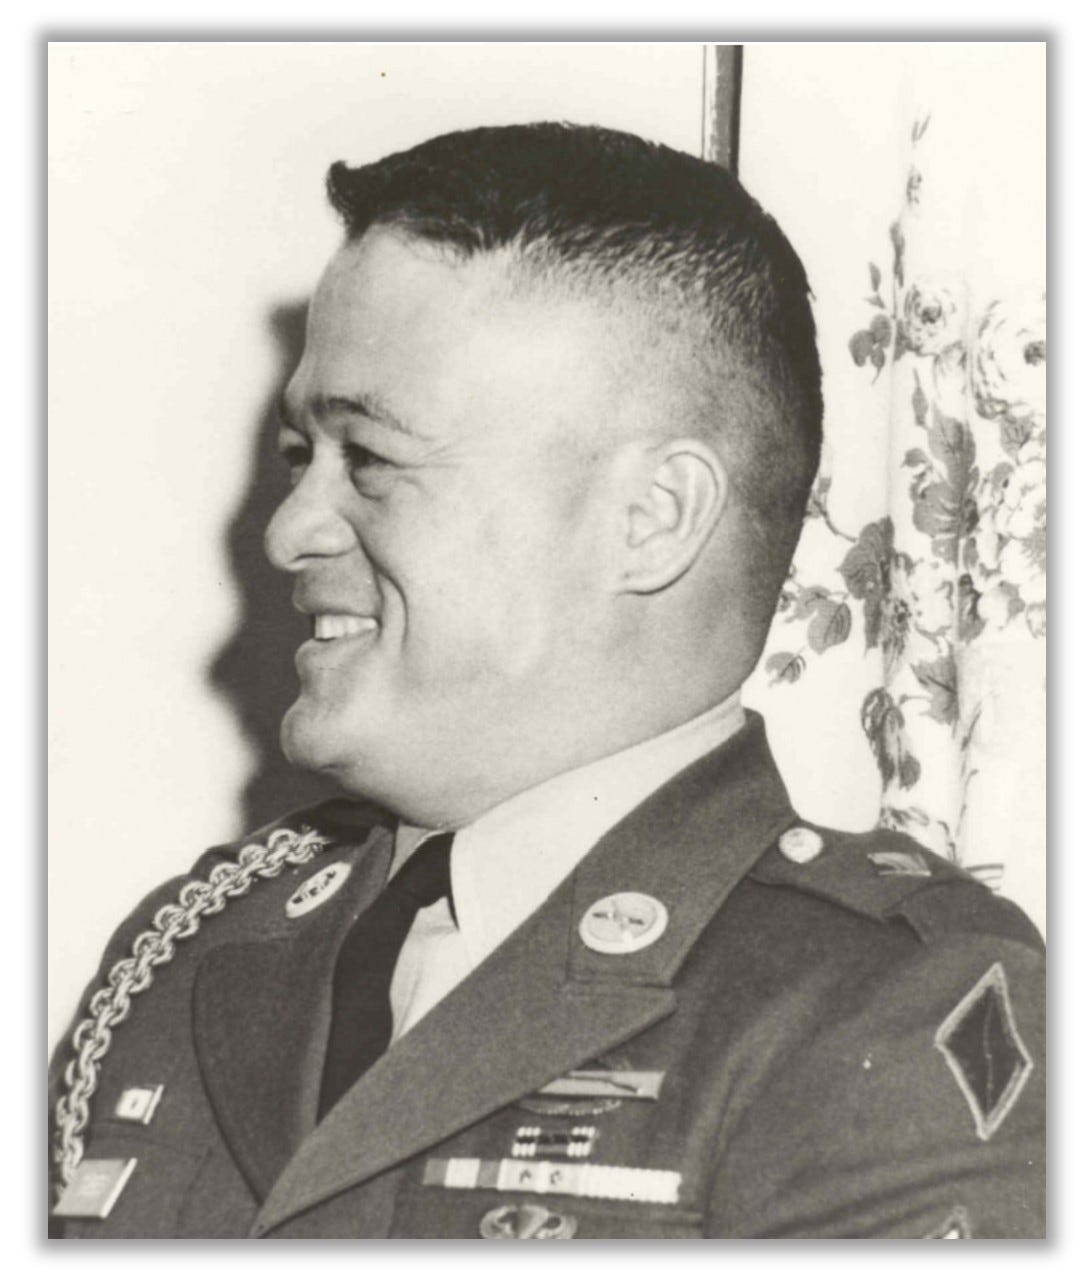 Maximo Yabes is shown in uniform, but it's a profile shot.  He is smiling.